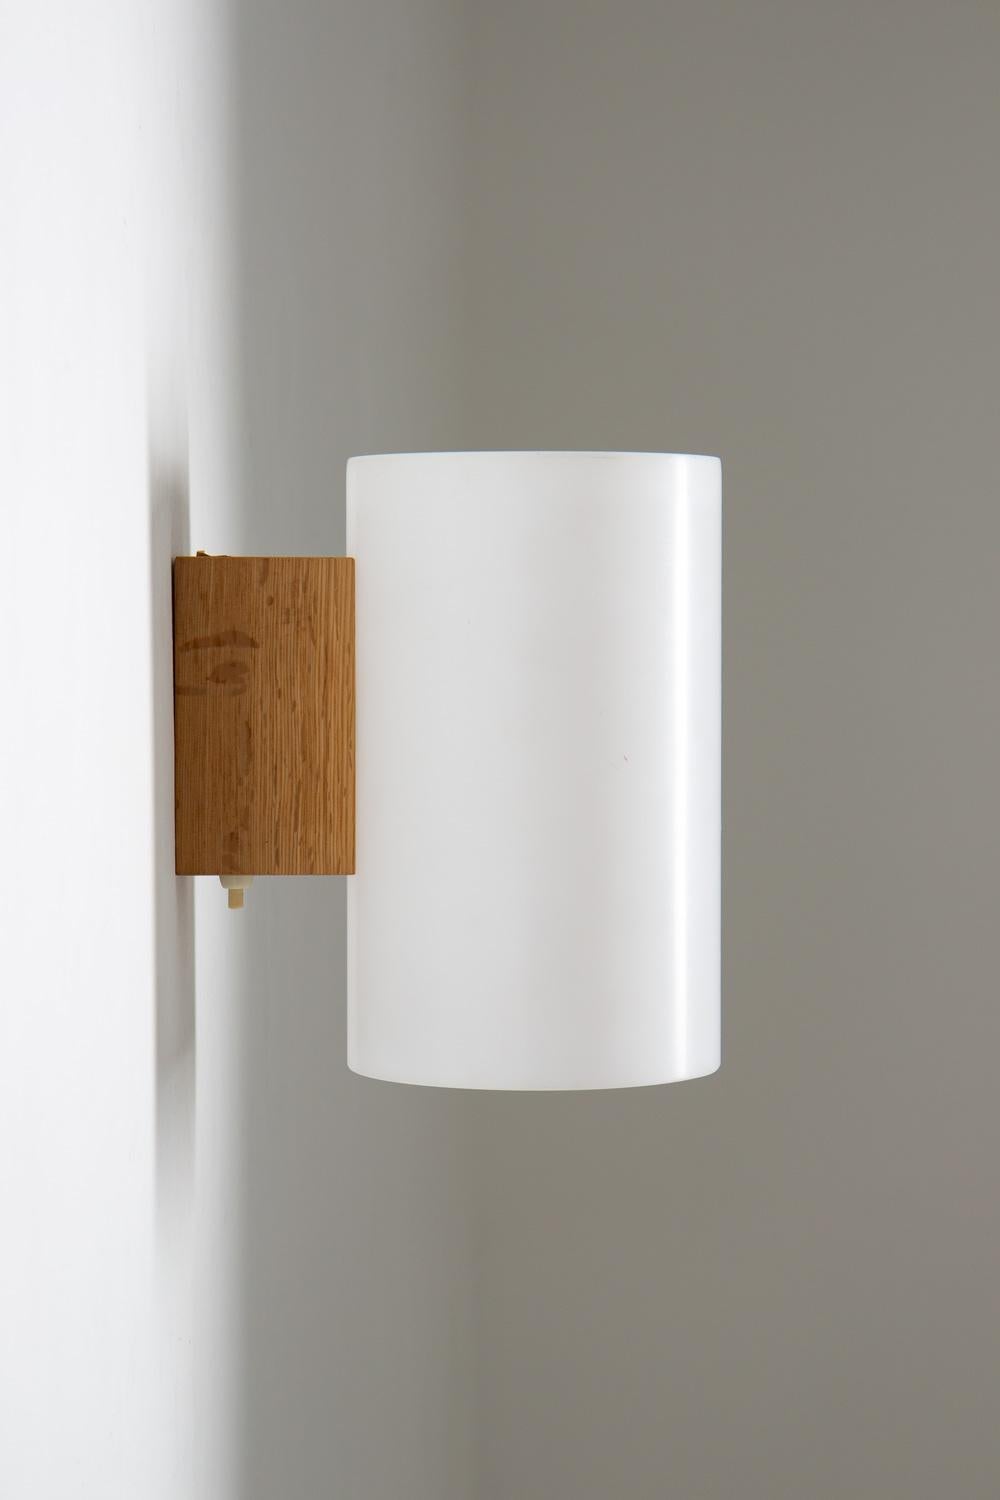 Add a touch of Scandinavian style to your home with these beautiful wall lamps by Uno & Östen Kristianson for Luxus, Sweden. The lamps are made of oak and feature white plexi shades that diffuse the light, creating a warm and inviting ambiance. The